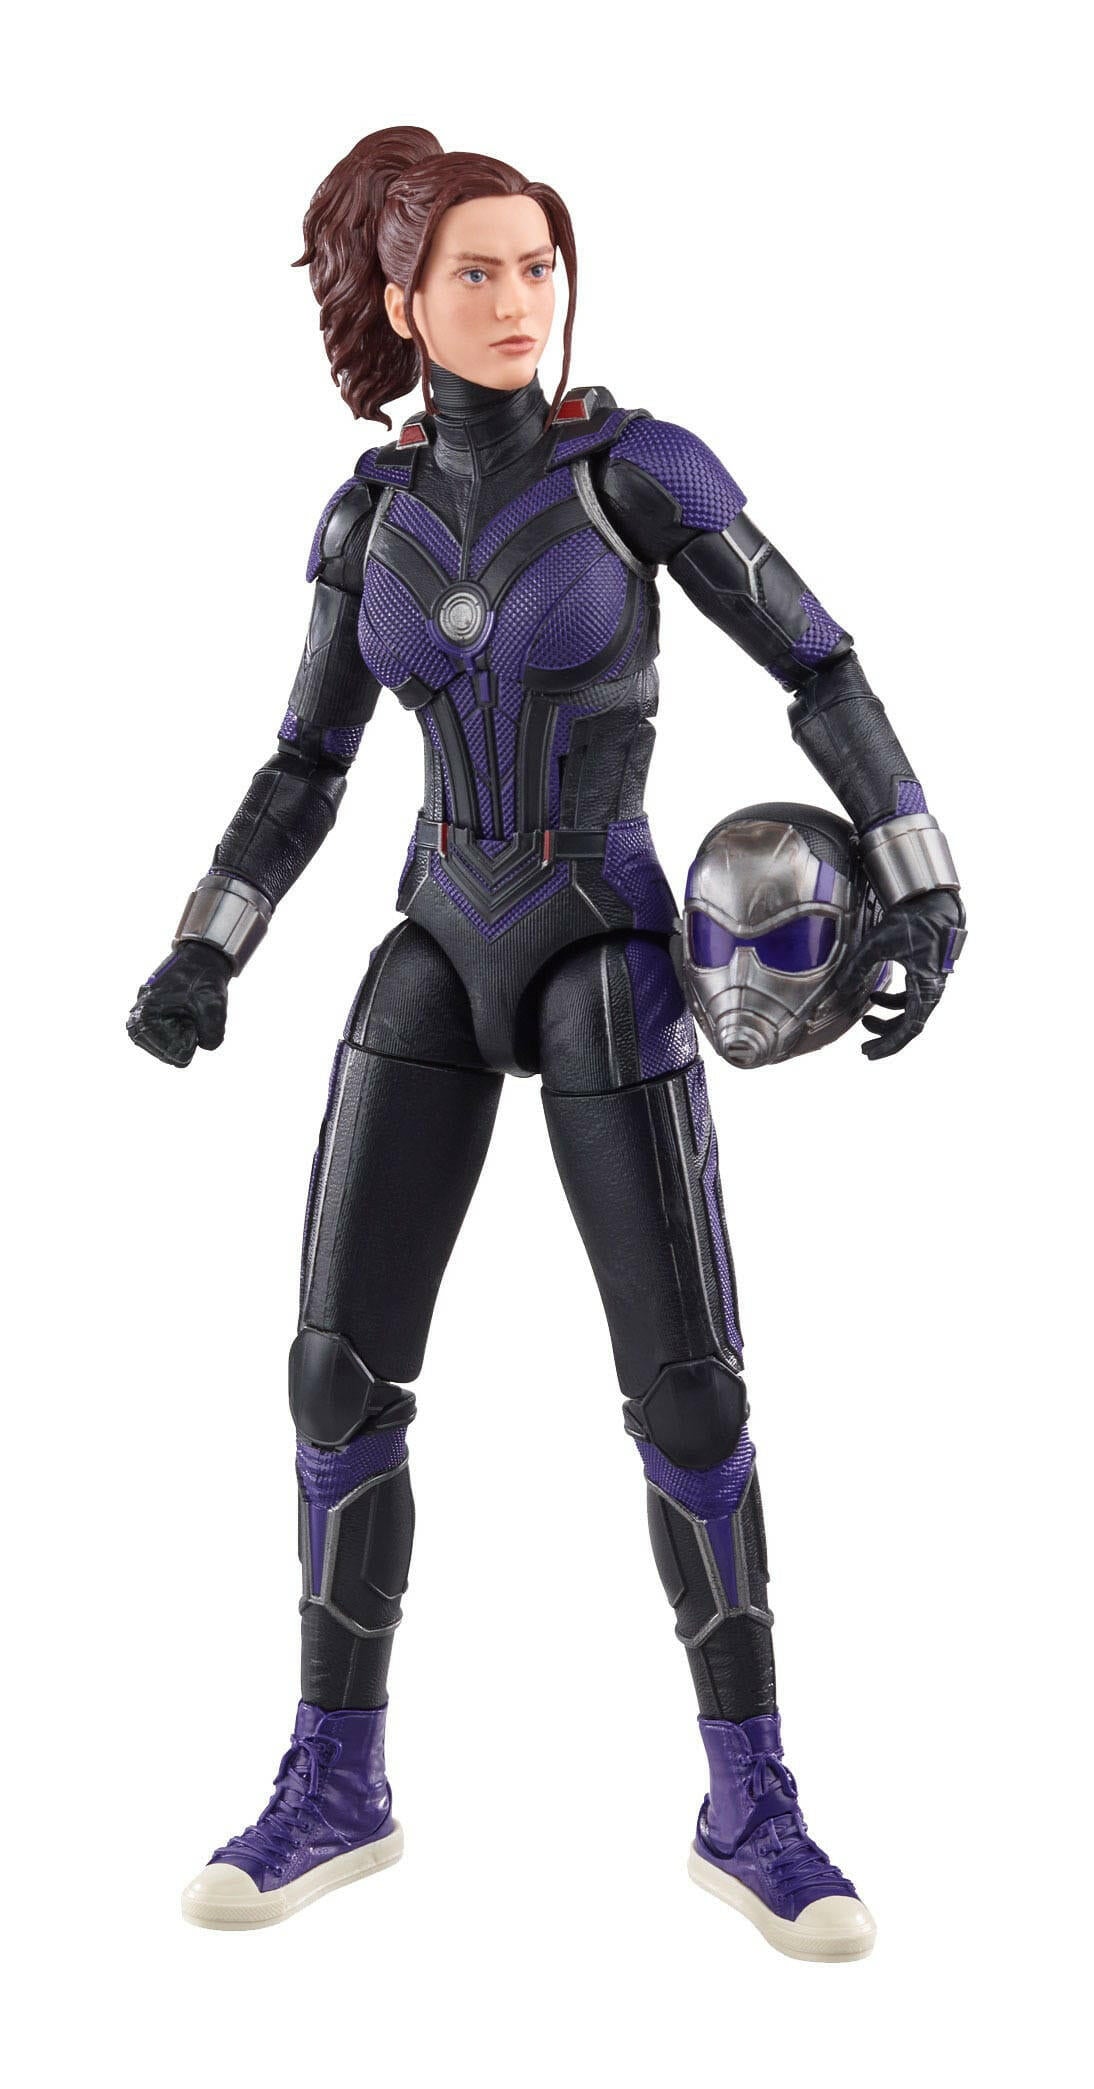 Marvel Legends Ant-Man and the Wasp: Quantumania Actionfigur BAF: Cassie Lang Marvel's Wasp 15cm Hasbro